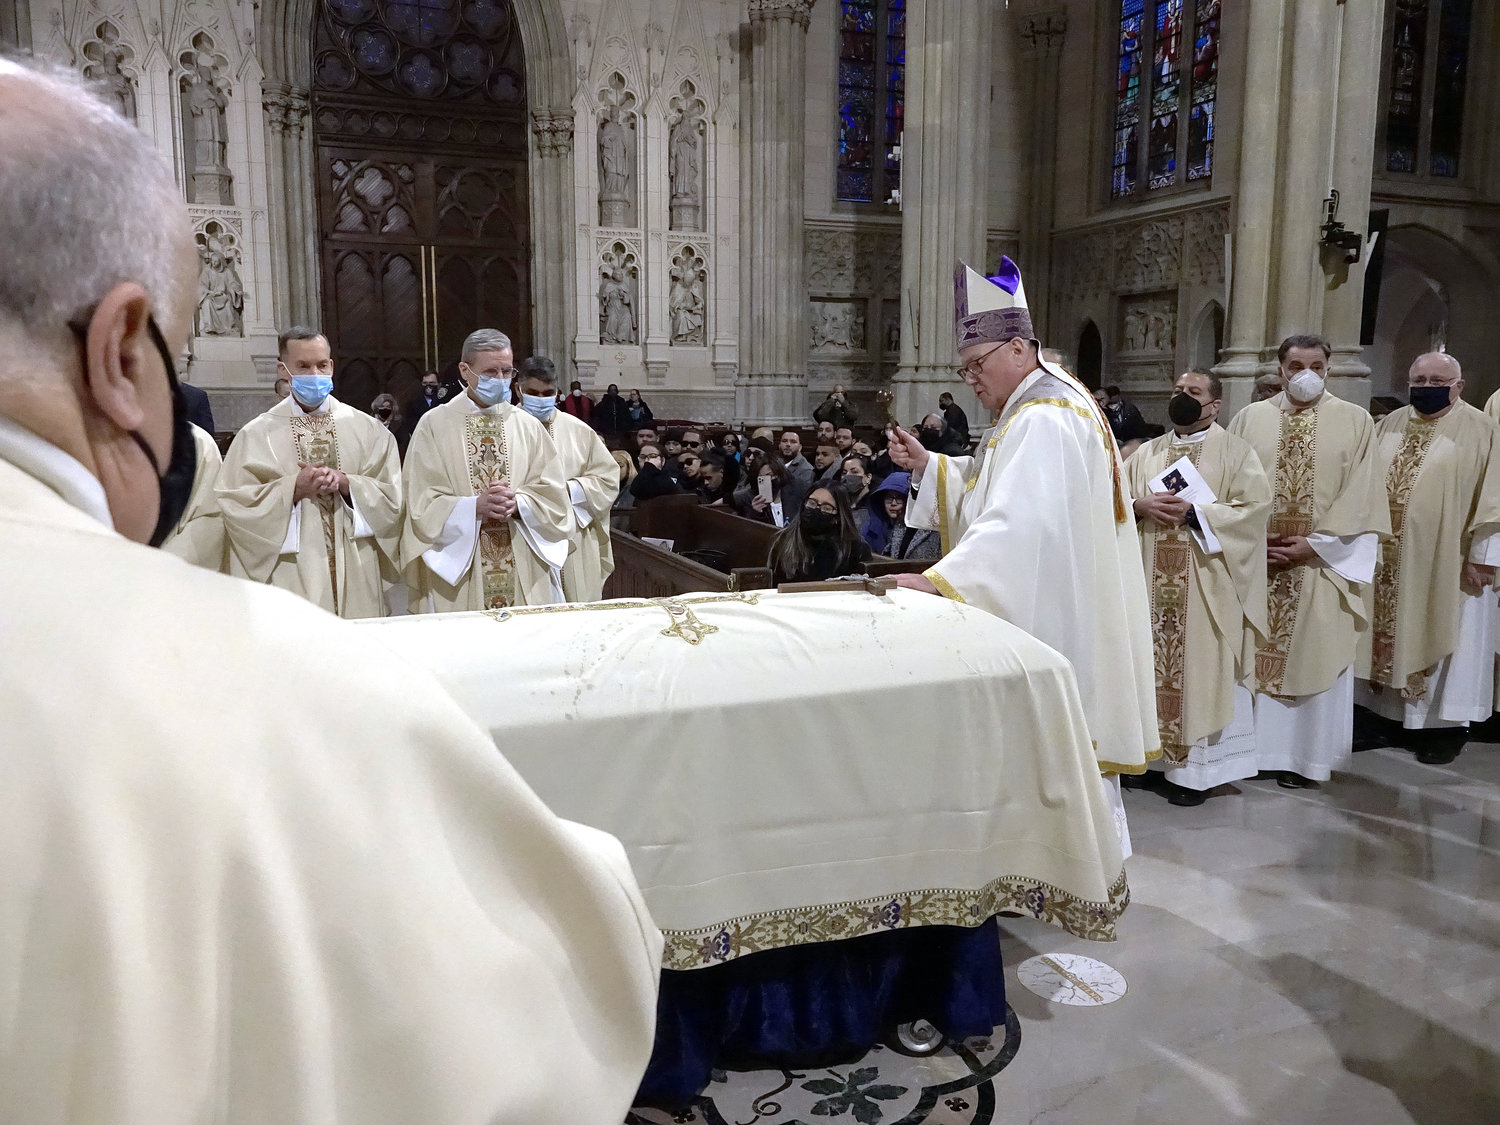 Cardinal Dolan sprinkles holy water on the casket.